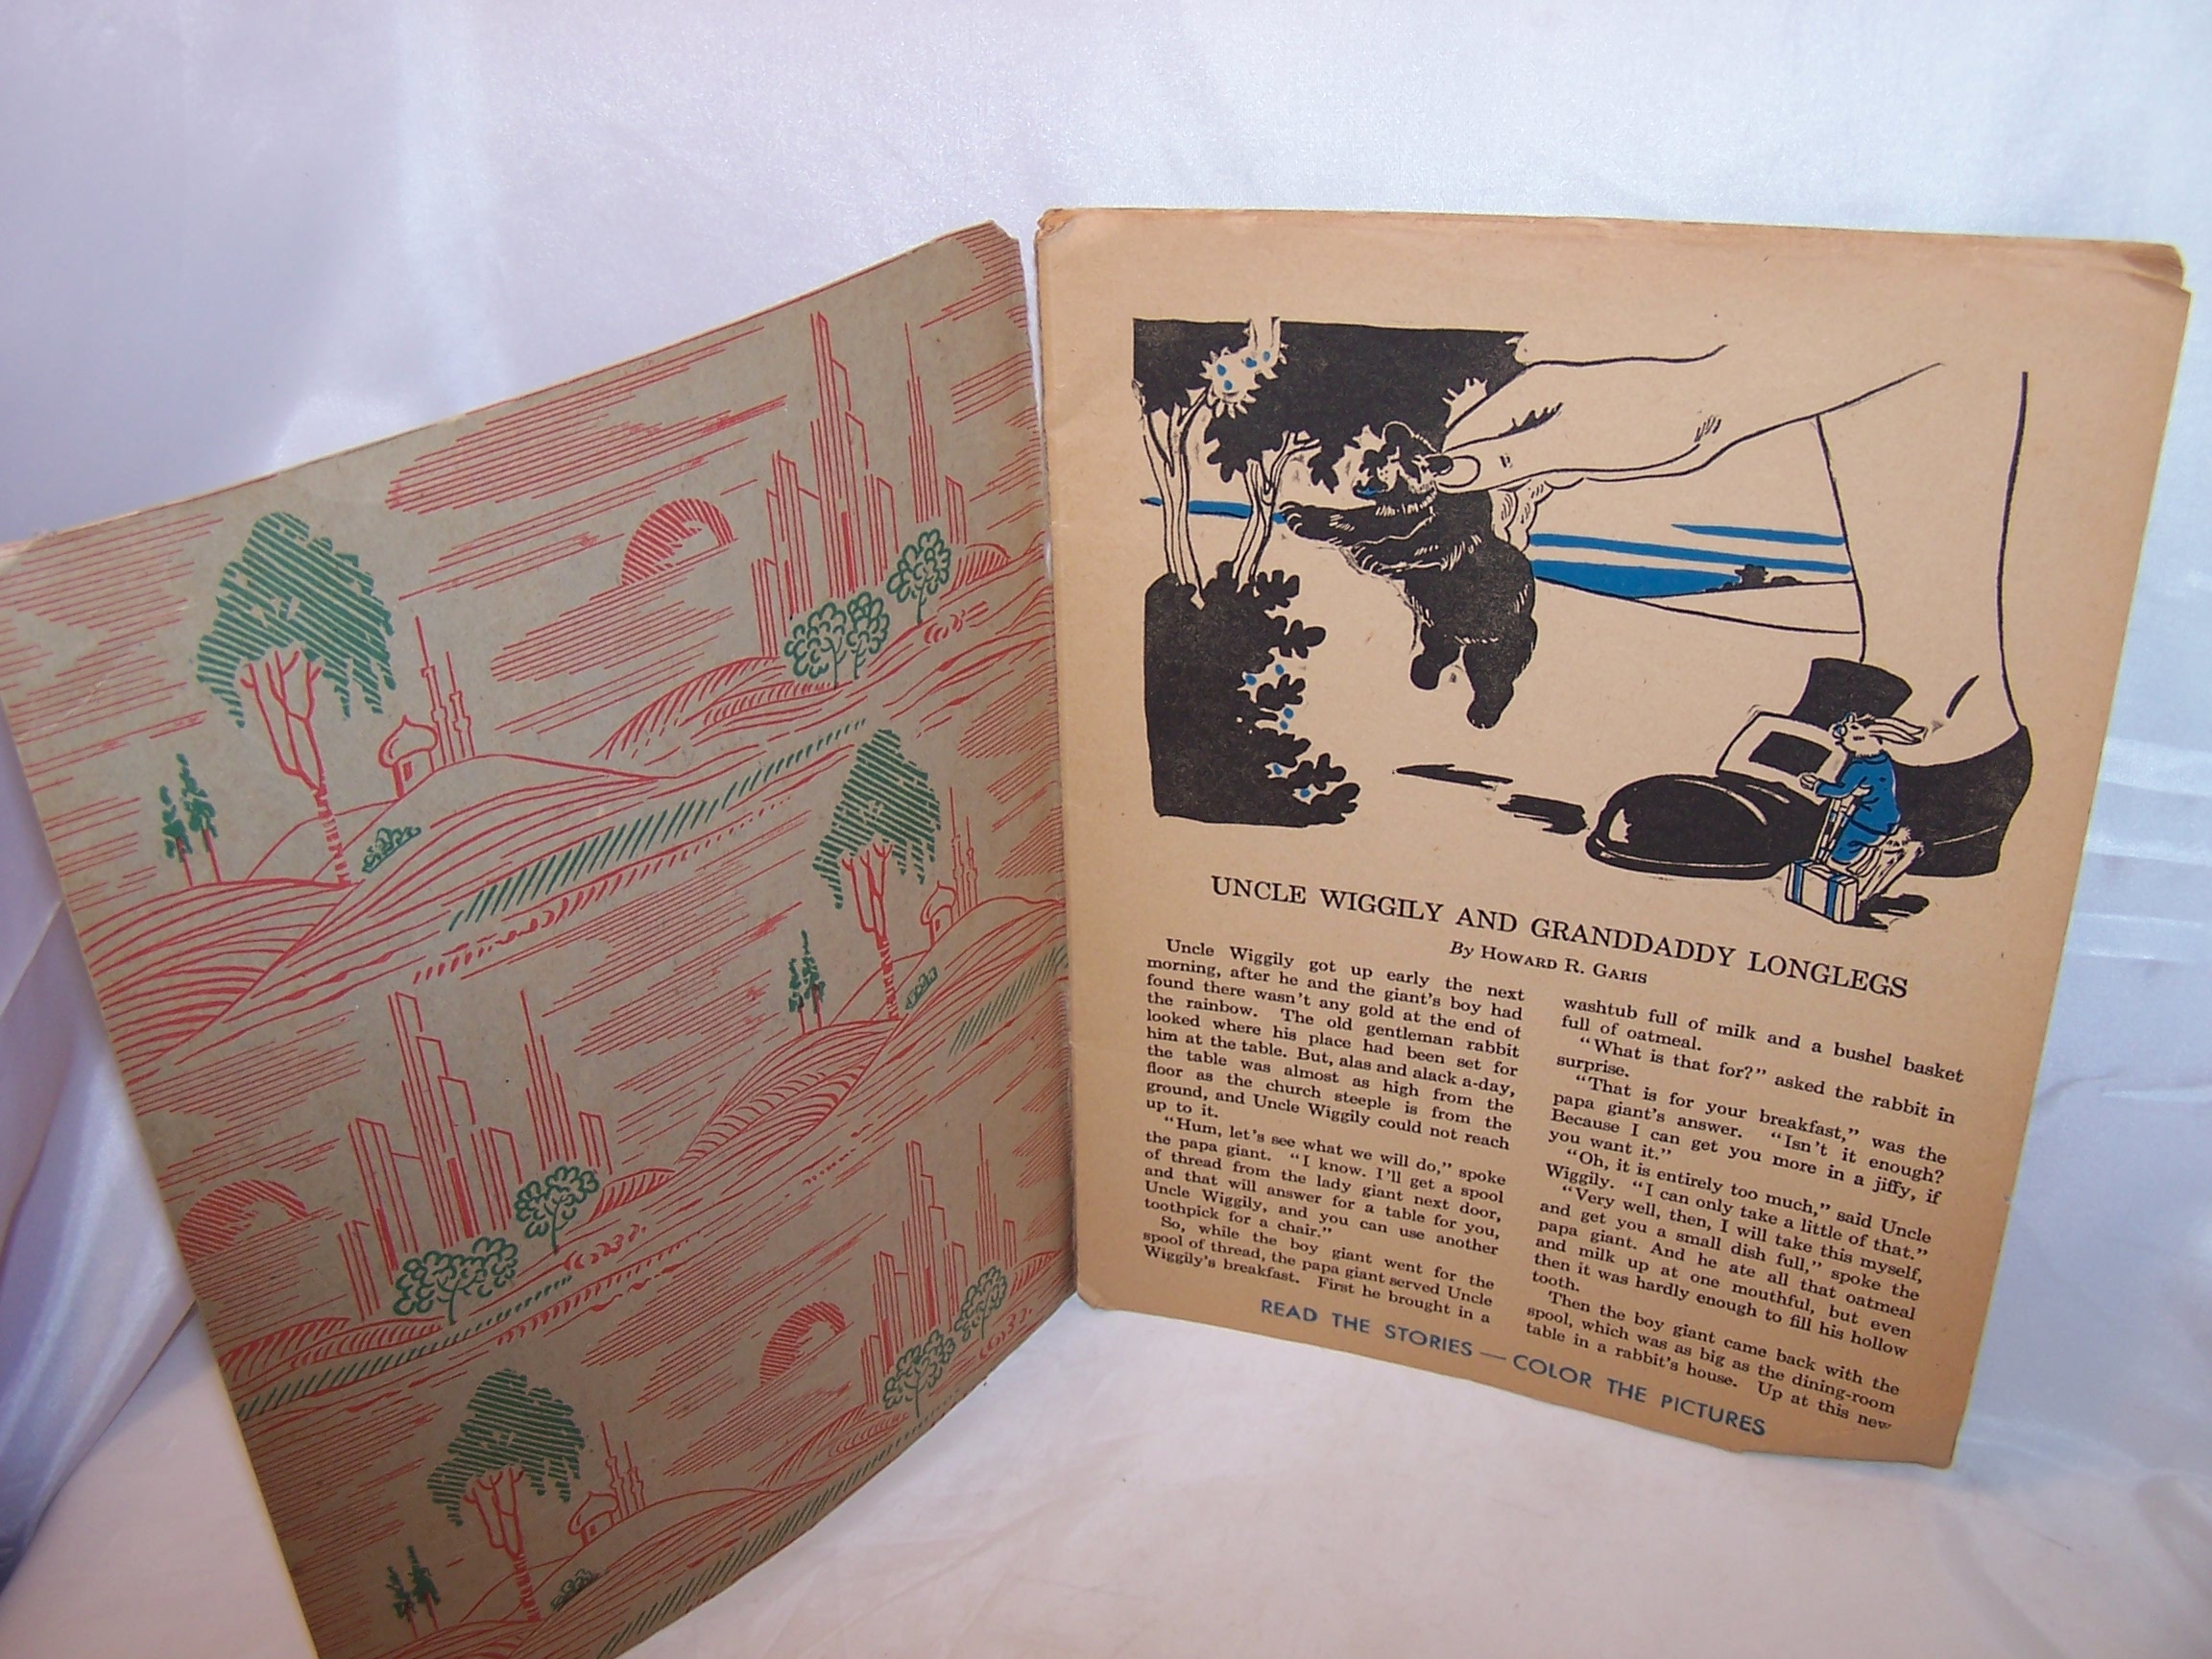 Image 1 of Uncle Wiggily and Granddaddy Longlegs Coloring and Storybook, 1943